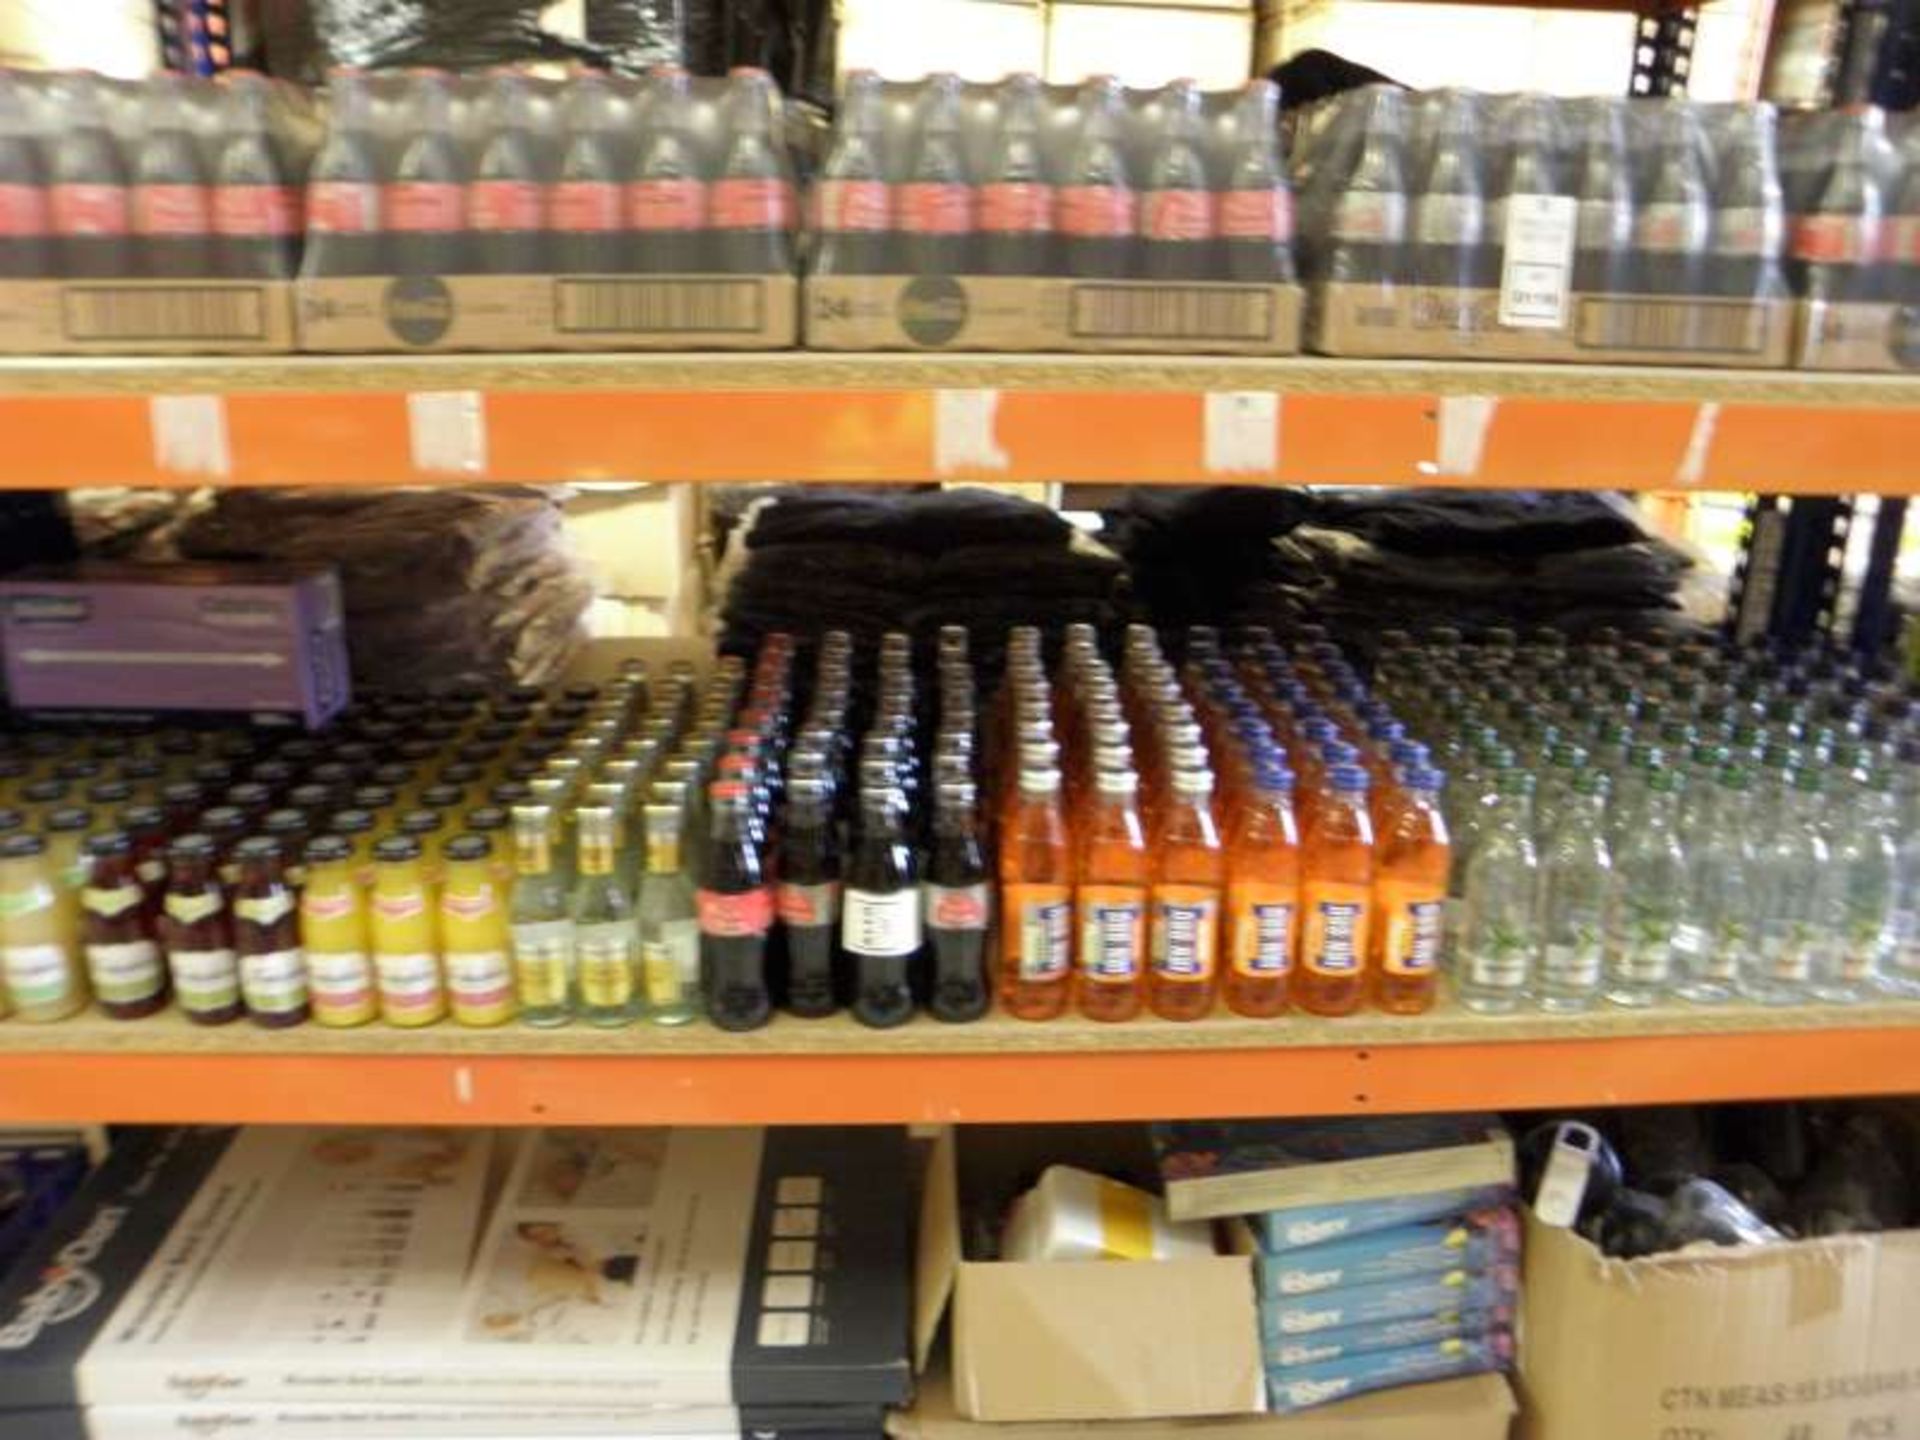 264 X BOTTLES OF SOFT DRINKS IE STRATHMORE WATER, IRON BRU, DIET COKE, COCA COLA, FROBISHERS